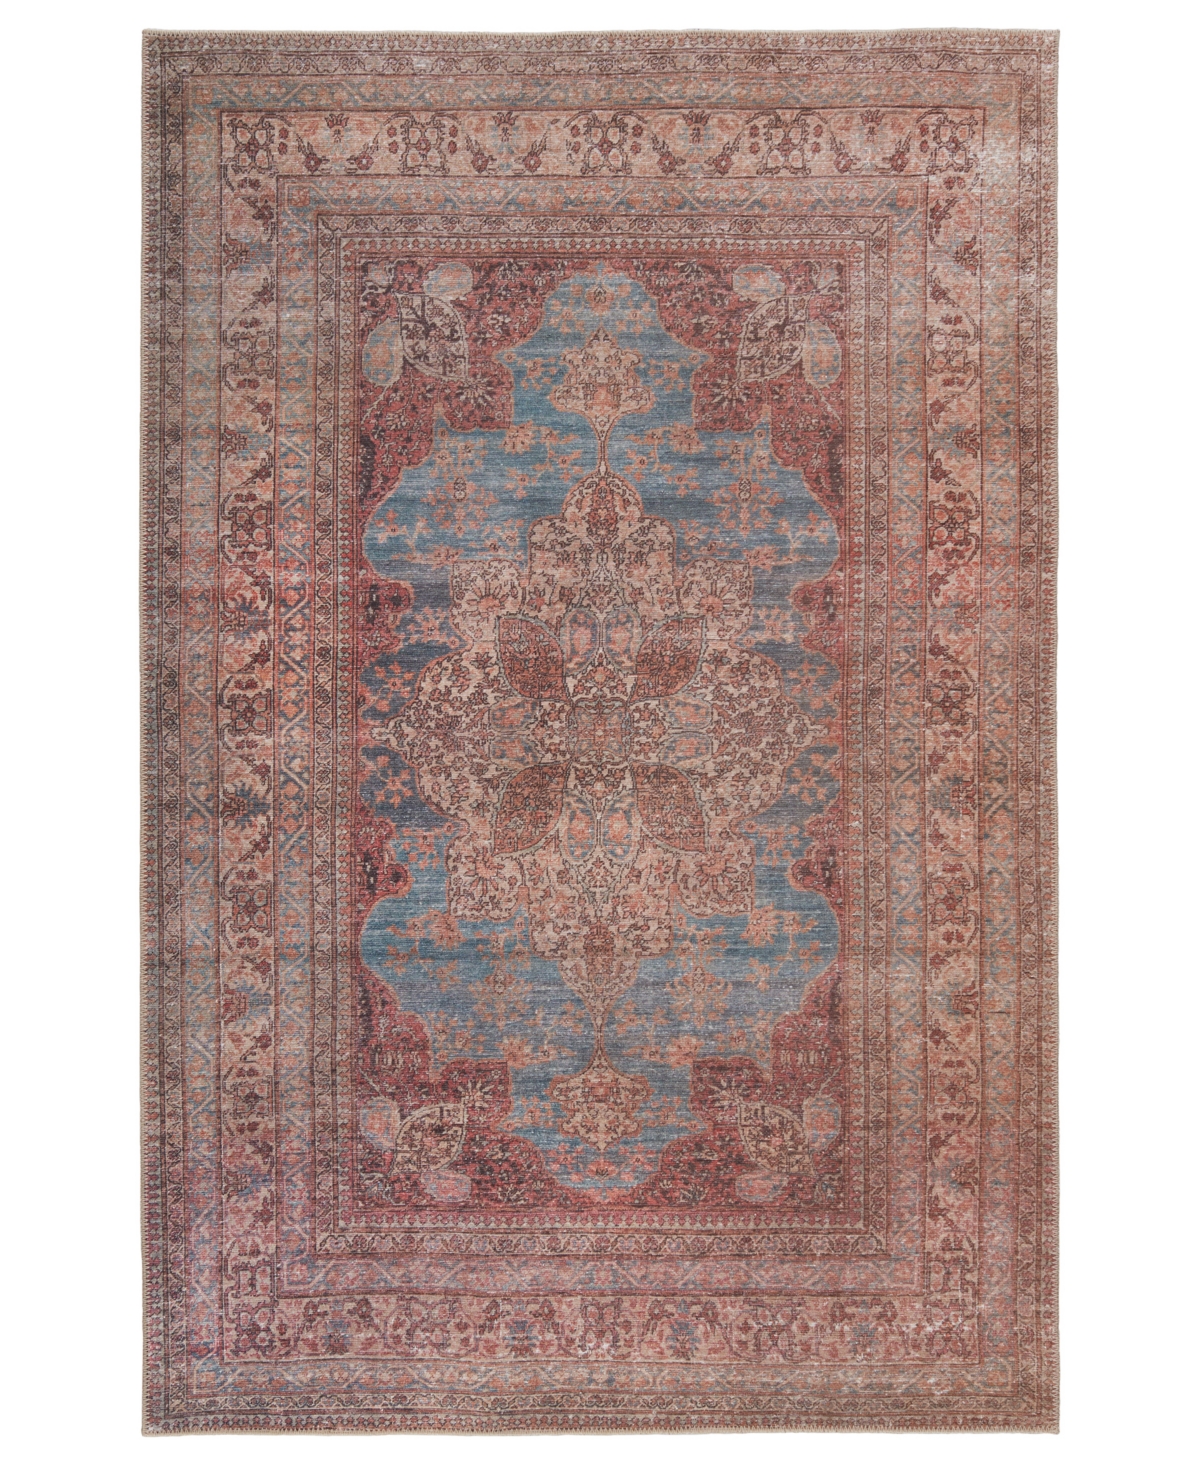 Kate Lester Harman HBL08 7'6in x 10' Area Rug - Brown